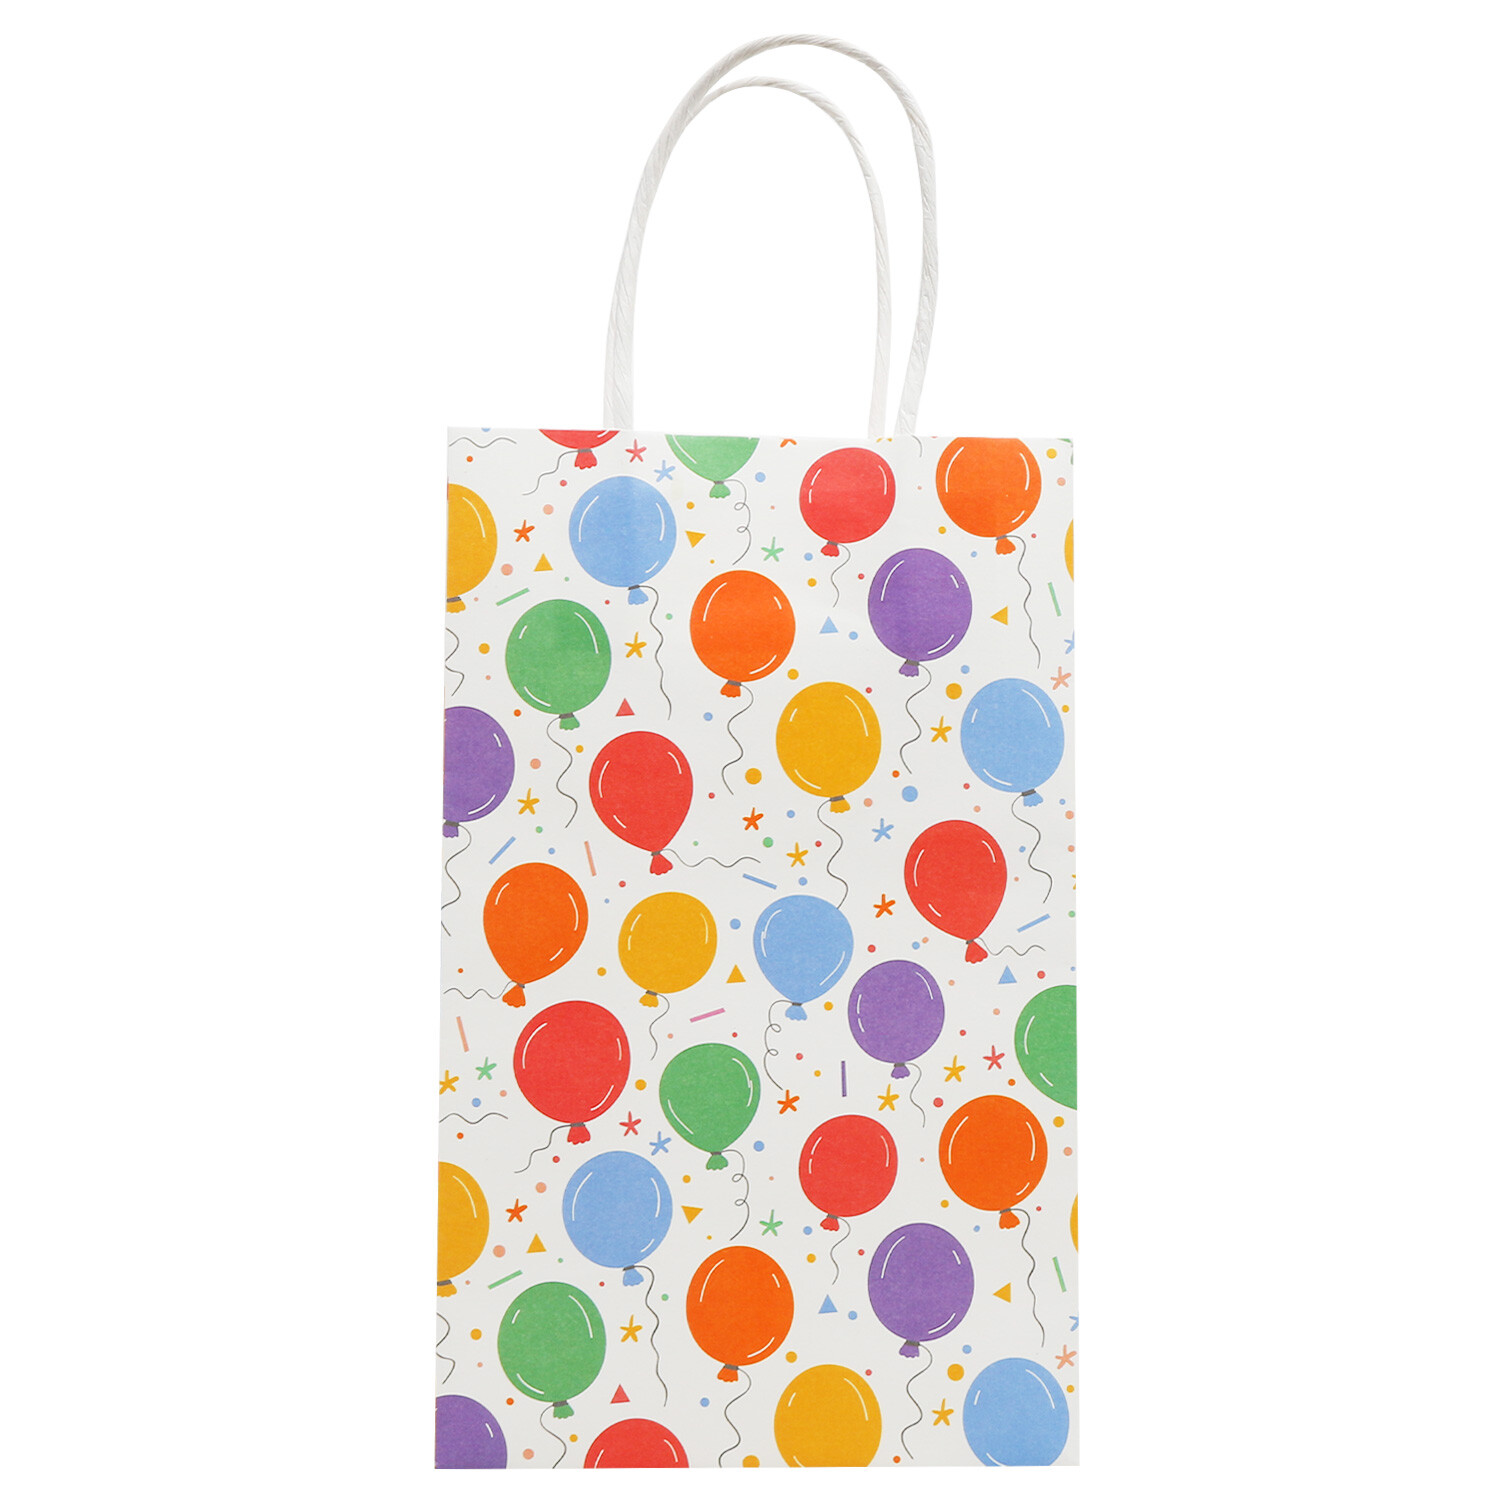 Balloon Party Bag 8 Pack Image